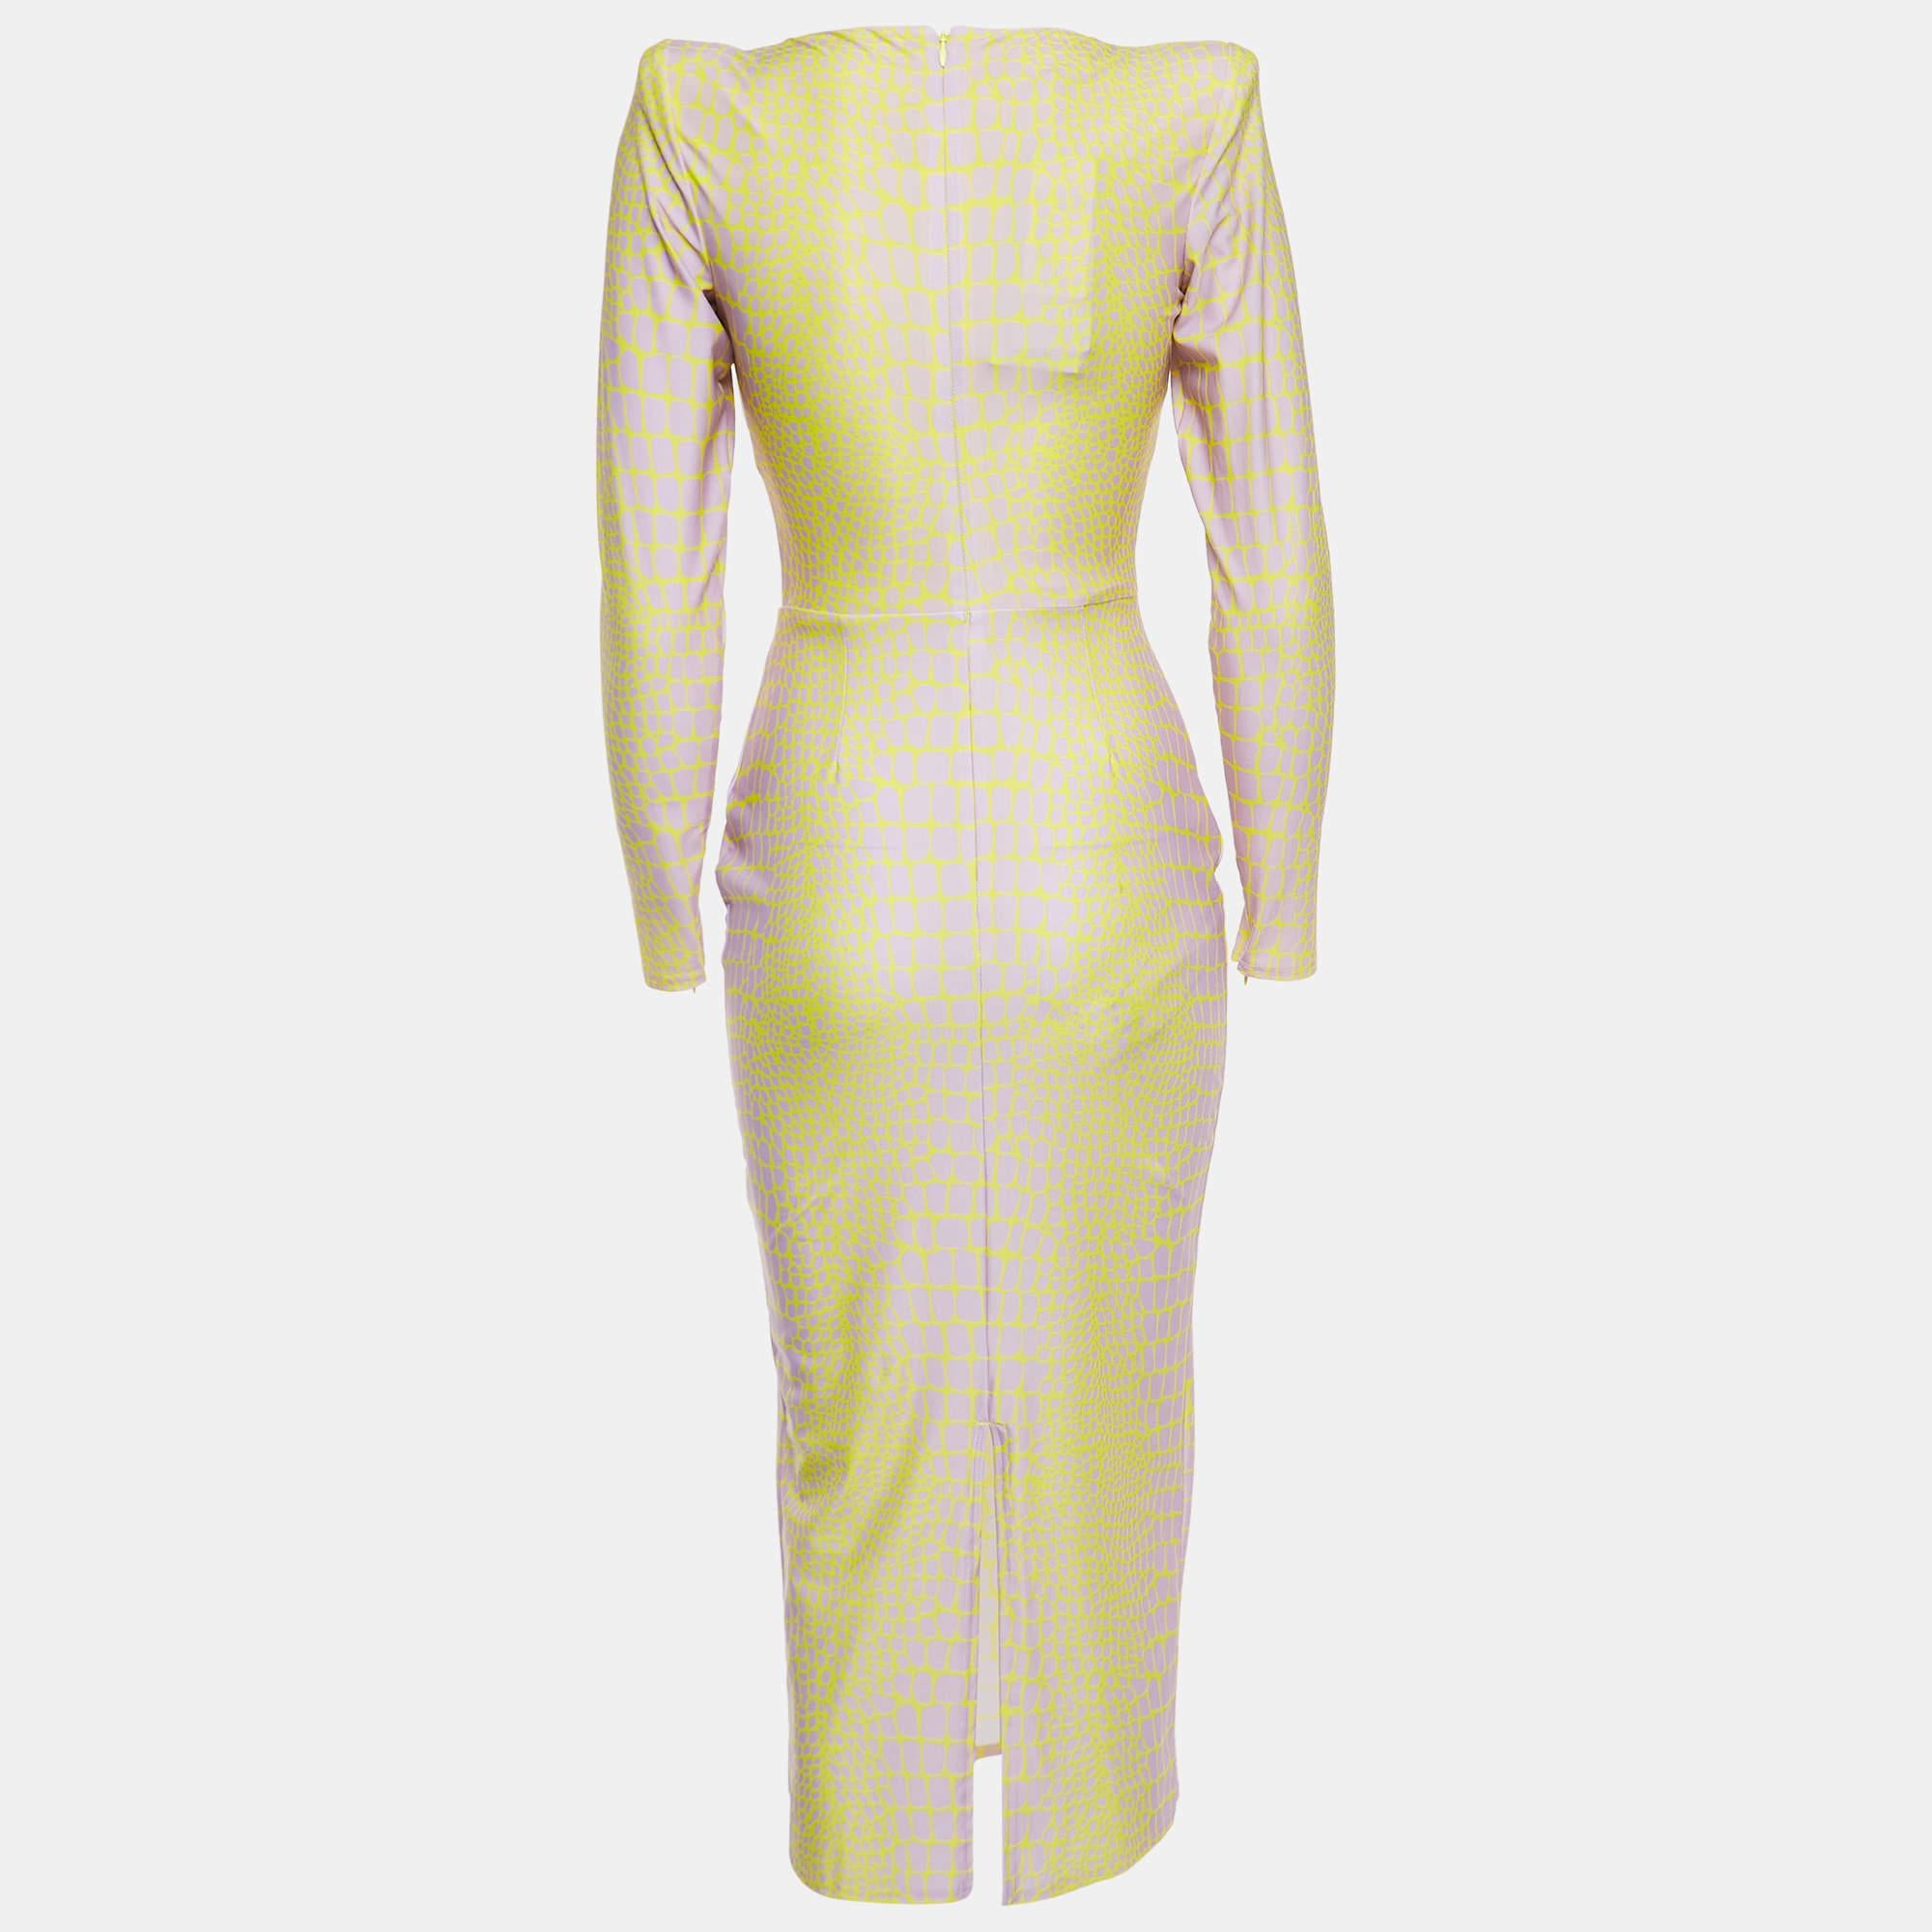 The Alex Perry dress is a striking and contemporary piece. Its vibrant yellow and lilac hues, coupled with a crocodile-inspired print, create a bold aesthetic. The jersey fabric offers comfort, while the midi length adds a touch of sophistication to